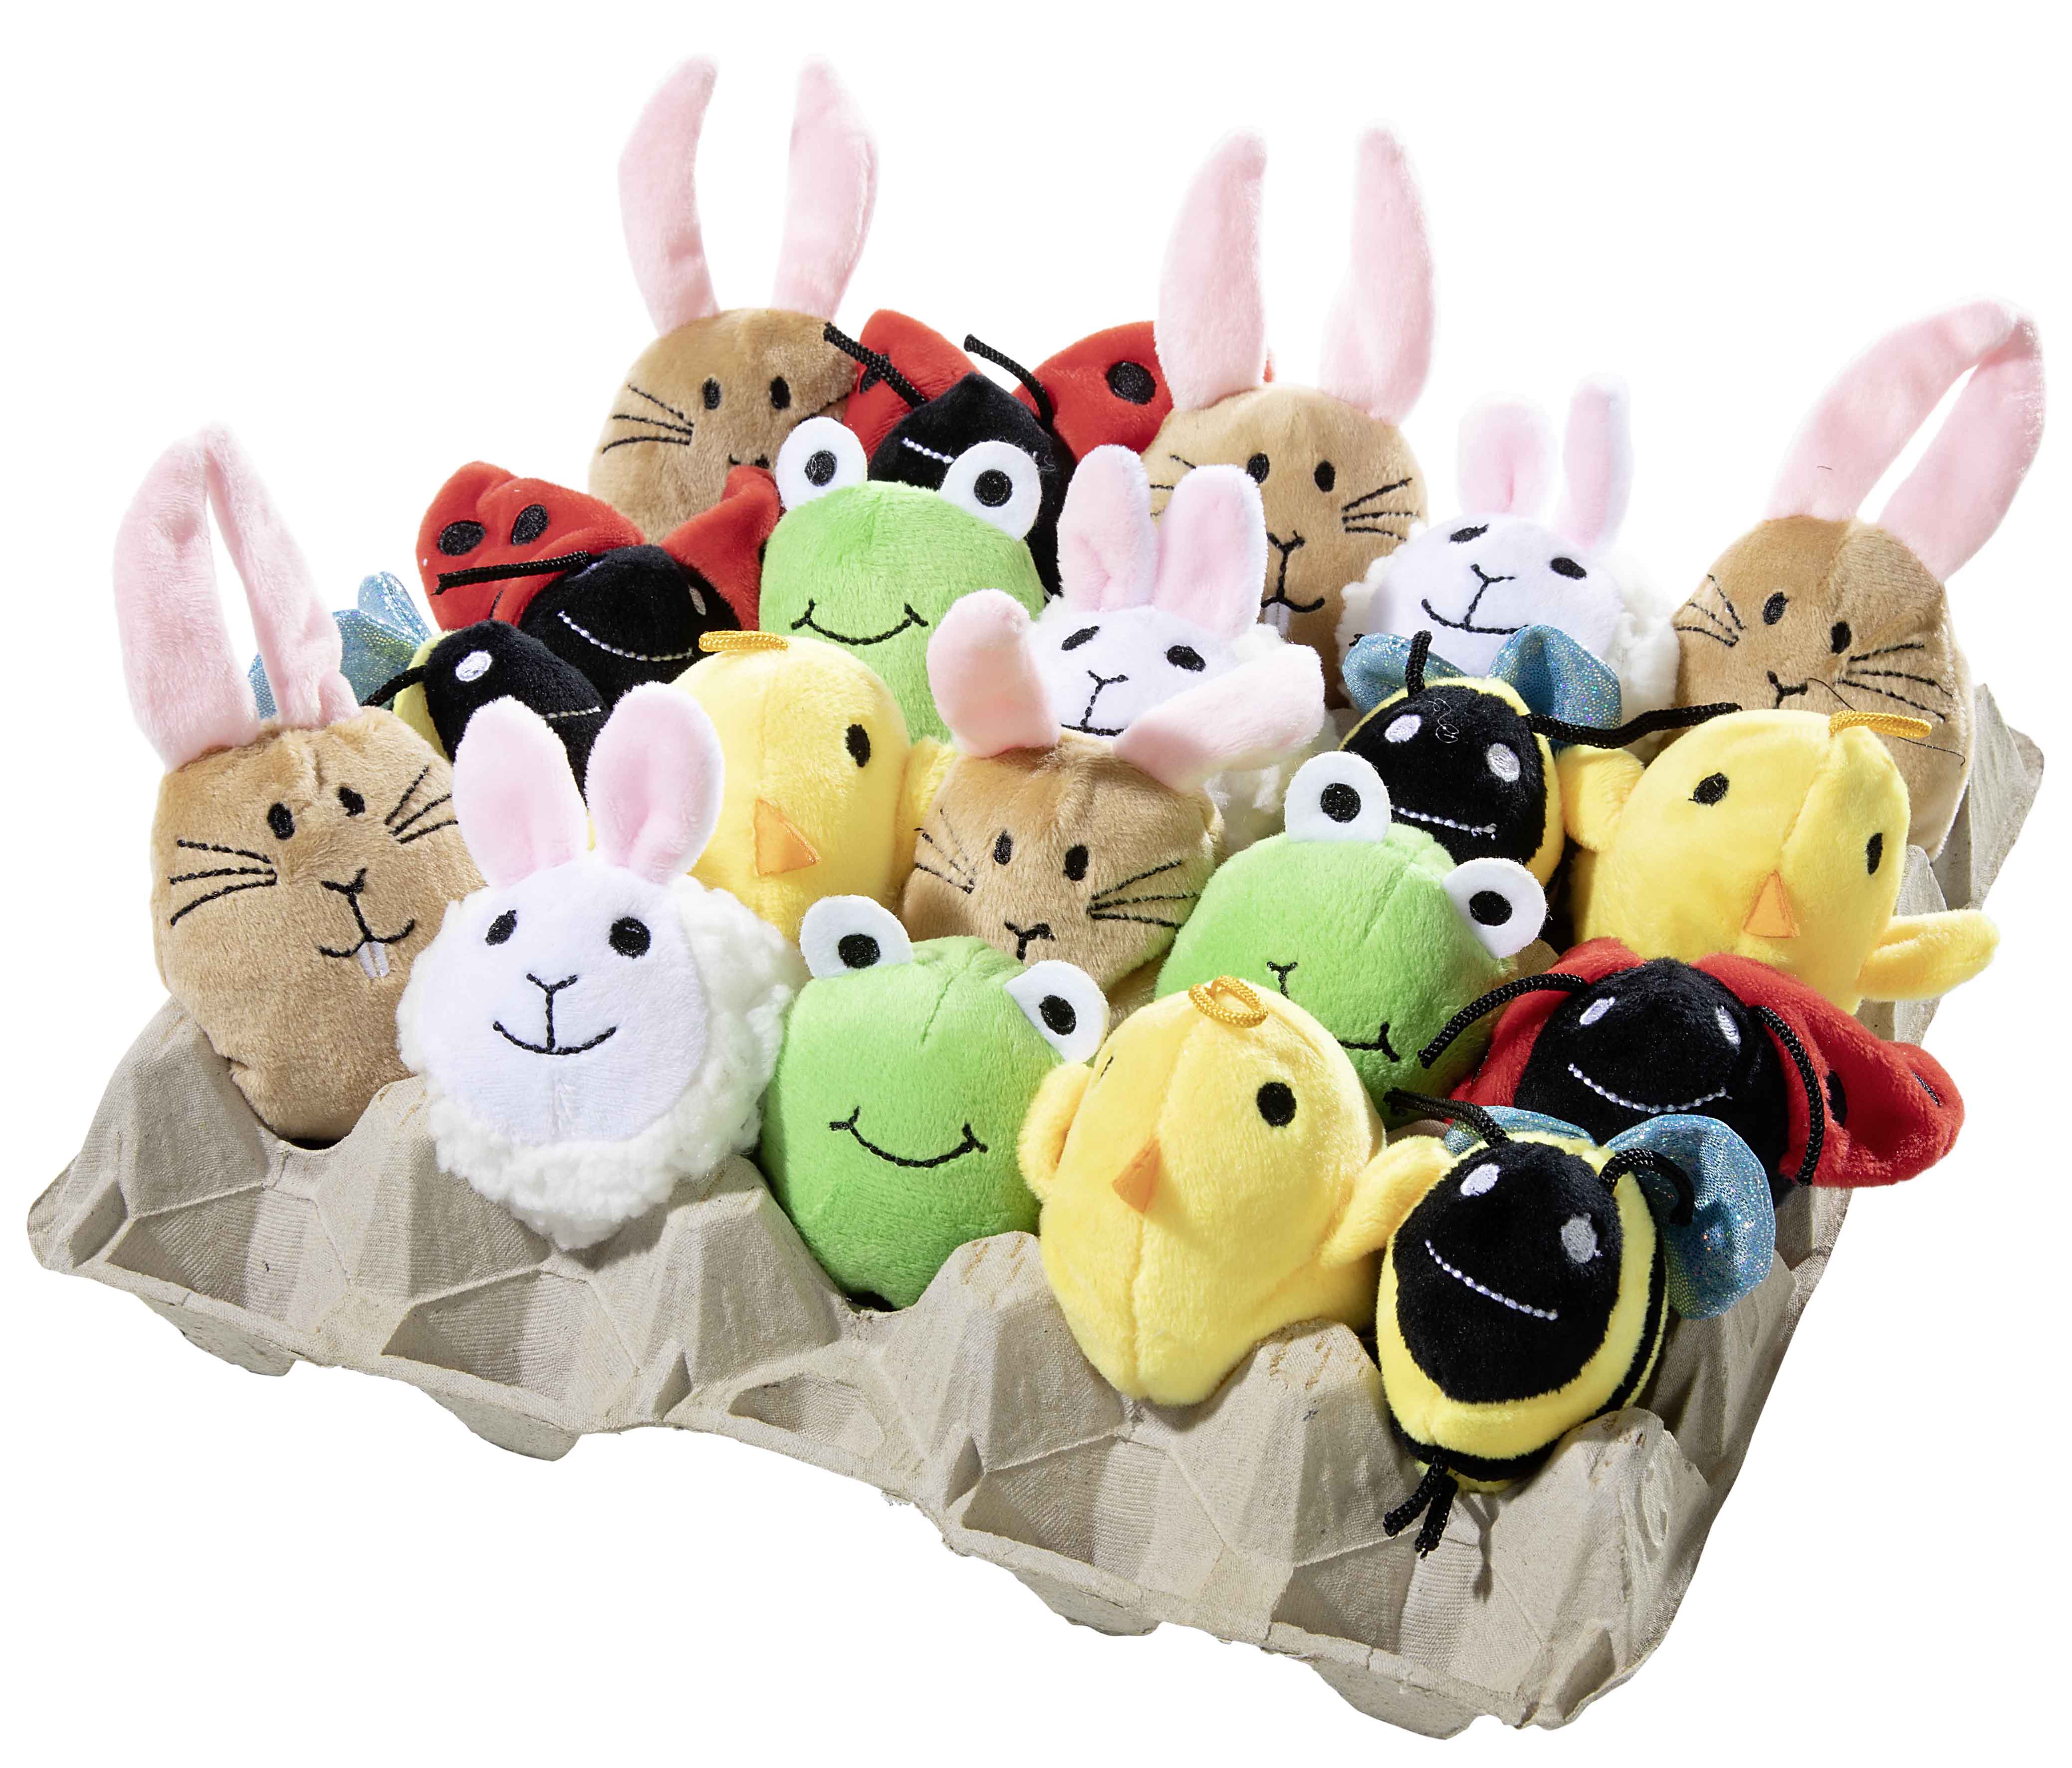 
Soft toy EASTER SHEEP